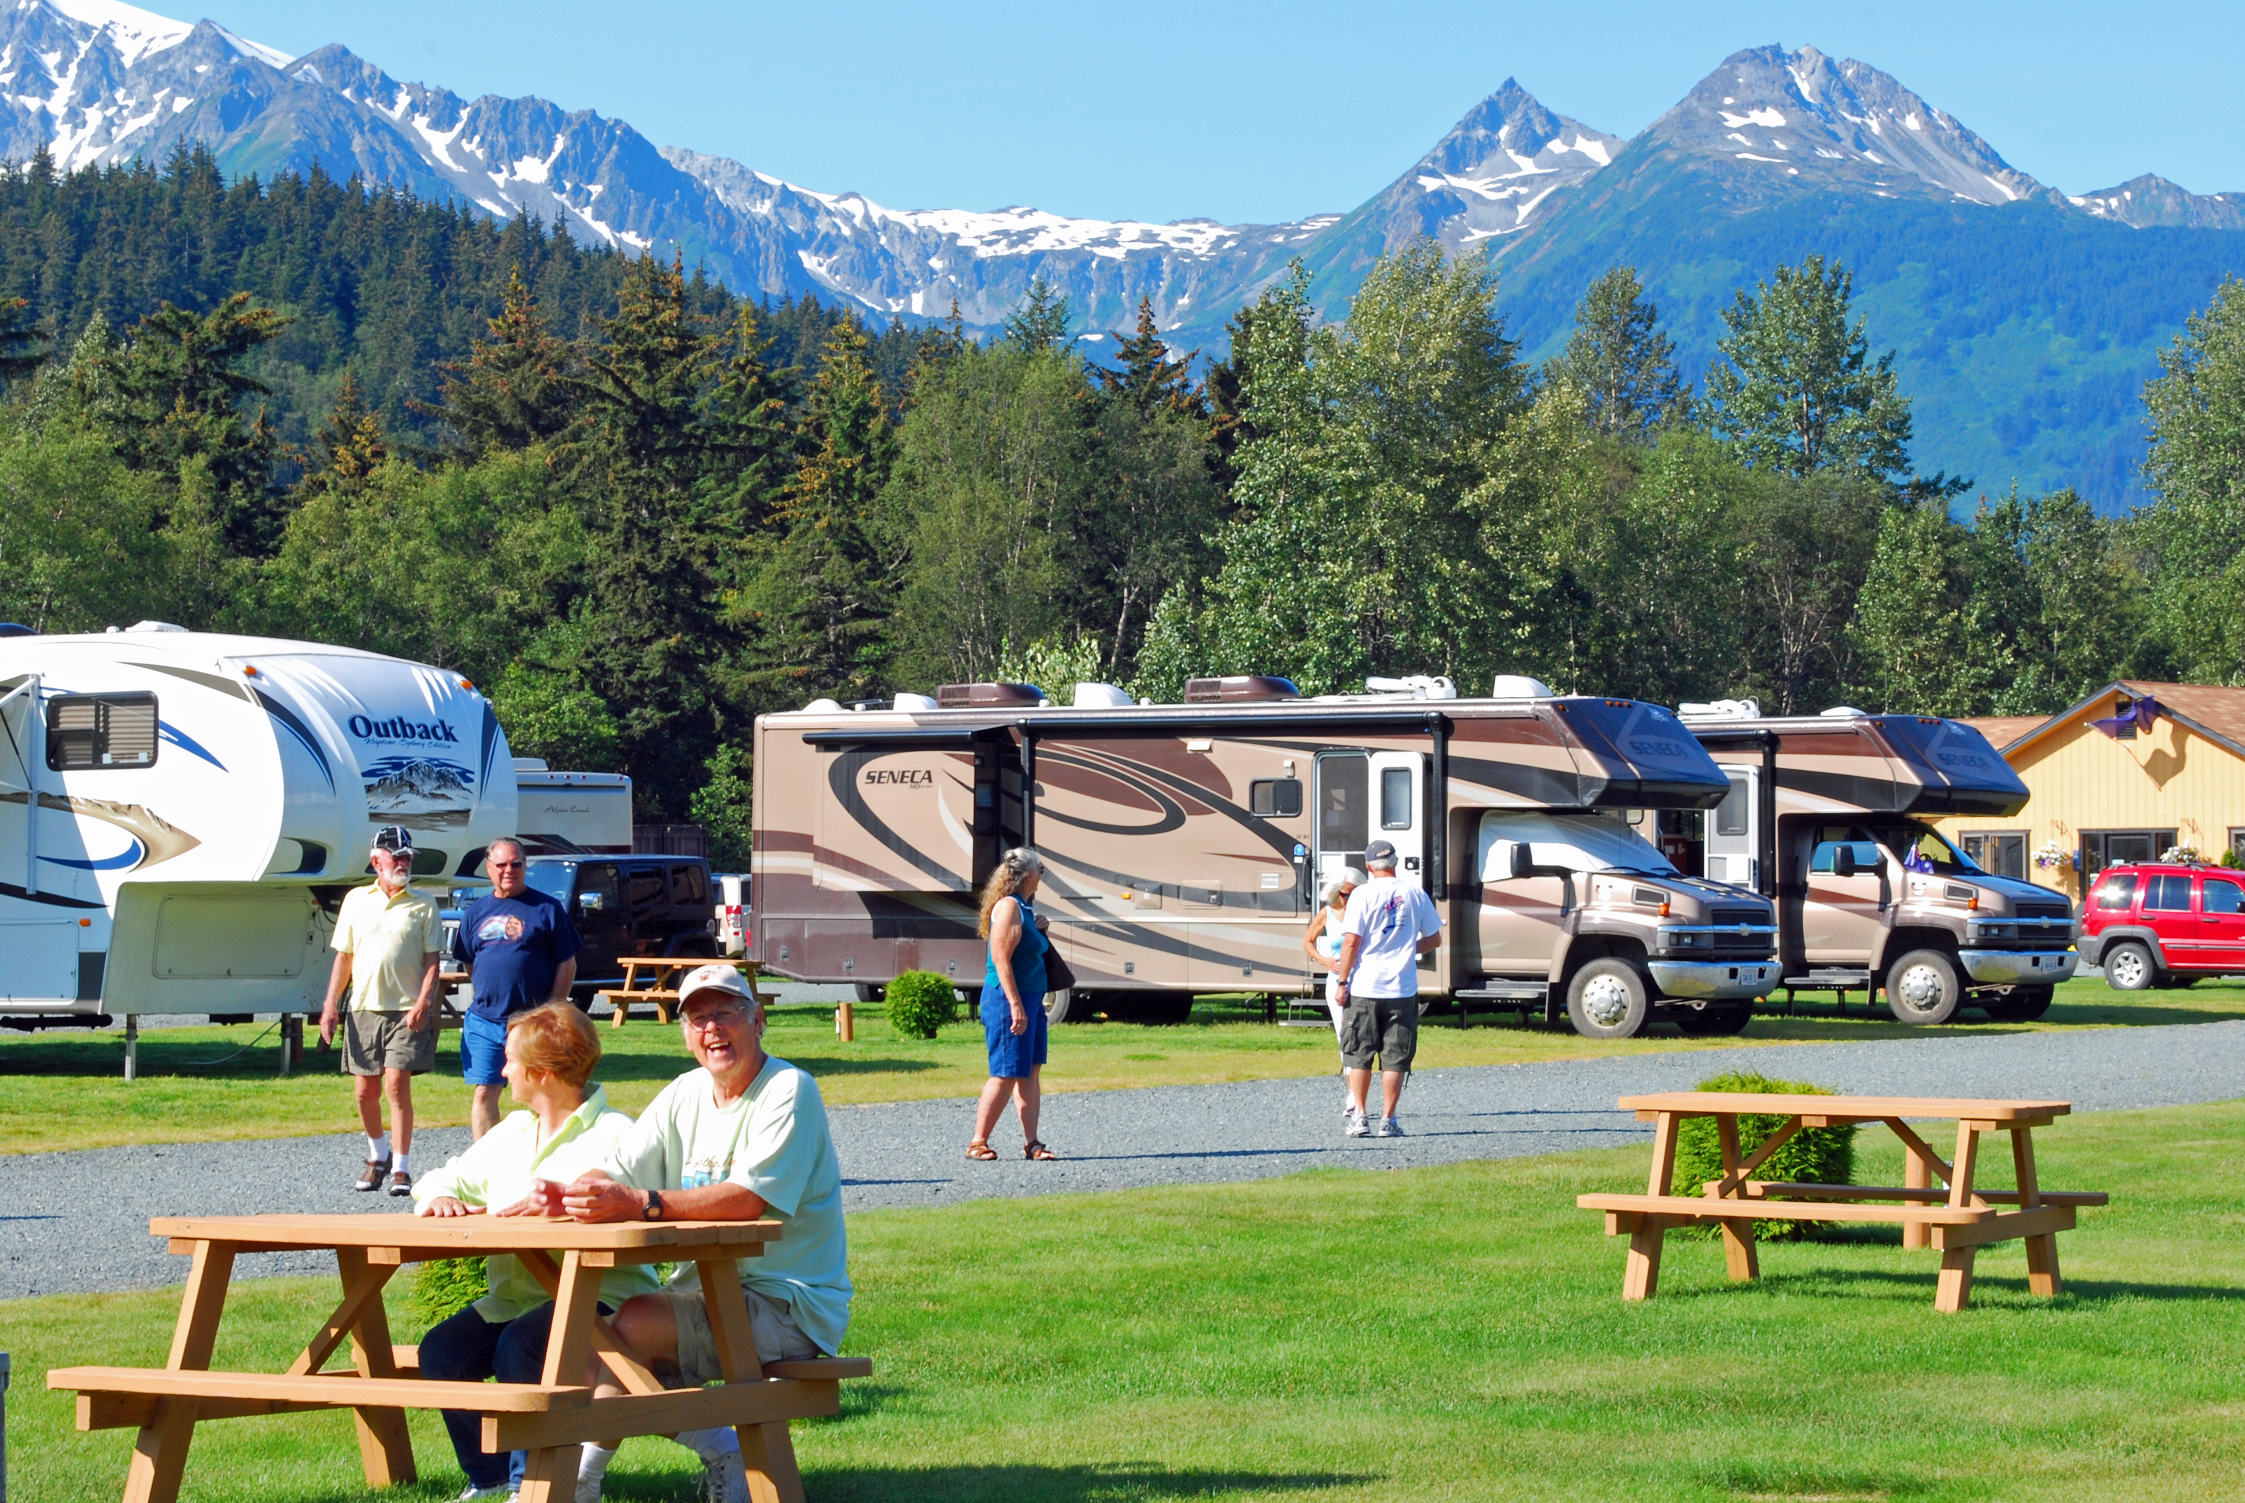 Photos from the Haines area and Haines Hitchup RV